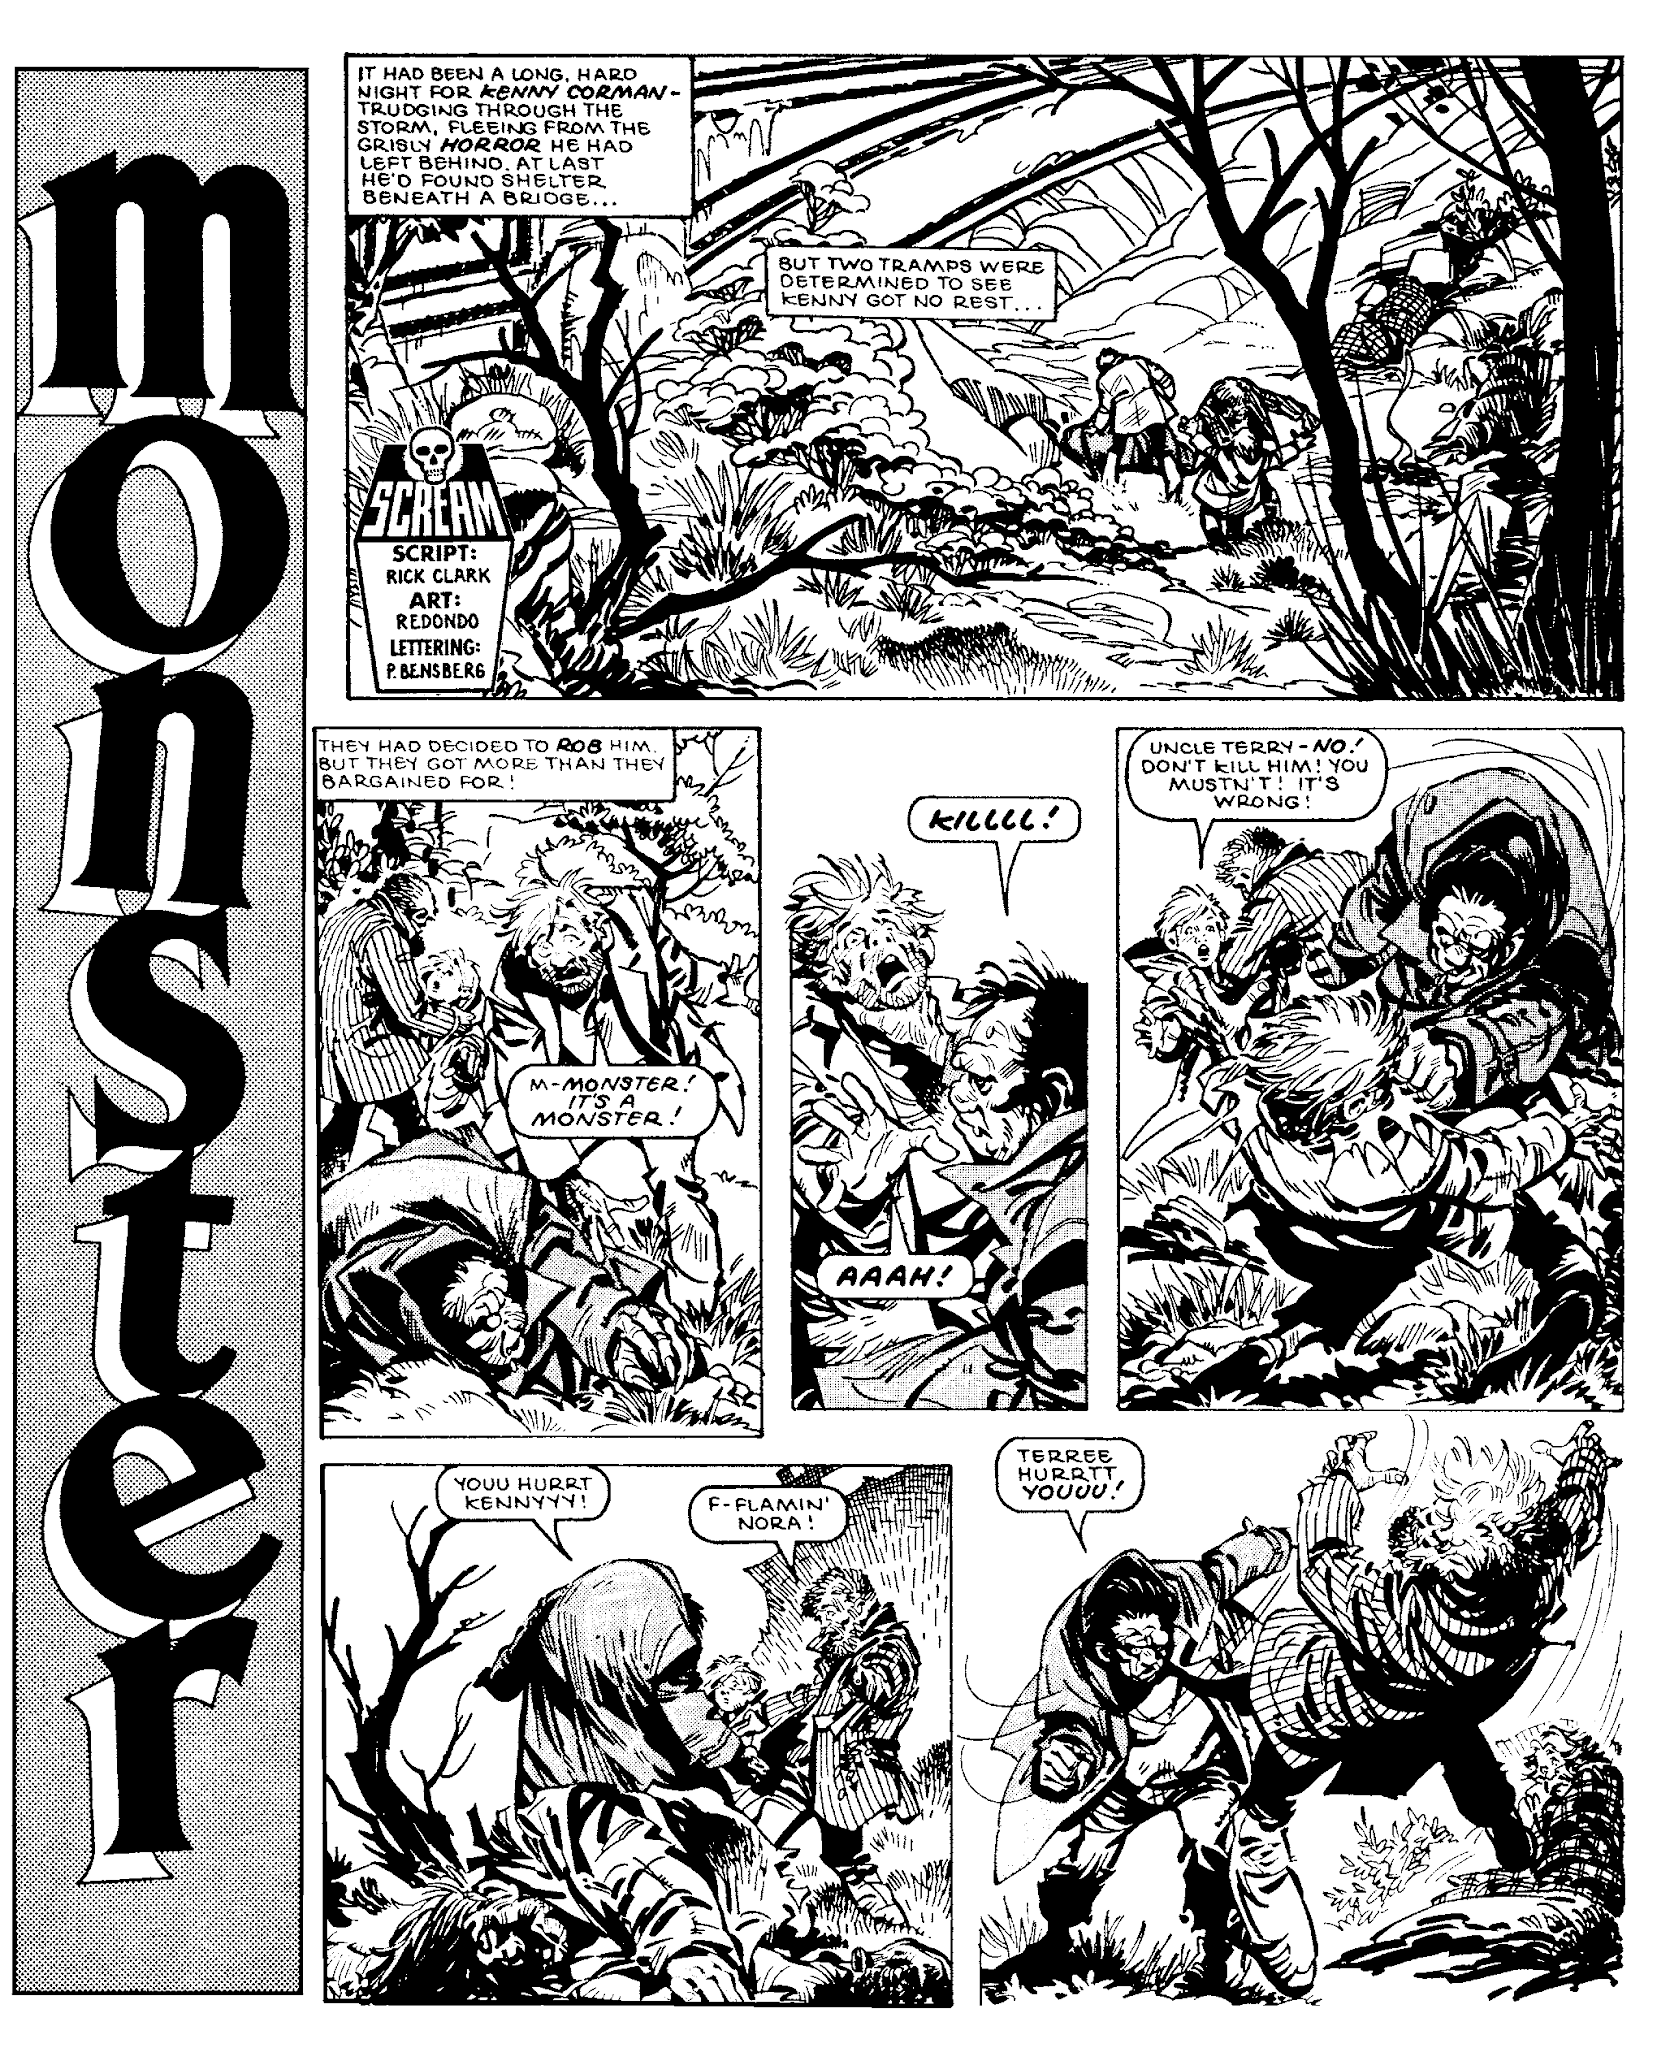 Read online Monster comic -  Issue # TPB (Part 1) - 35